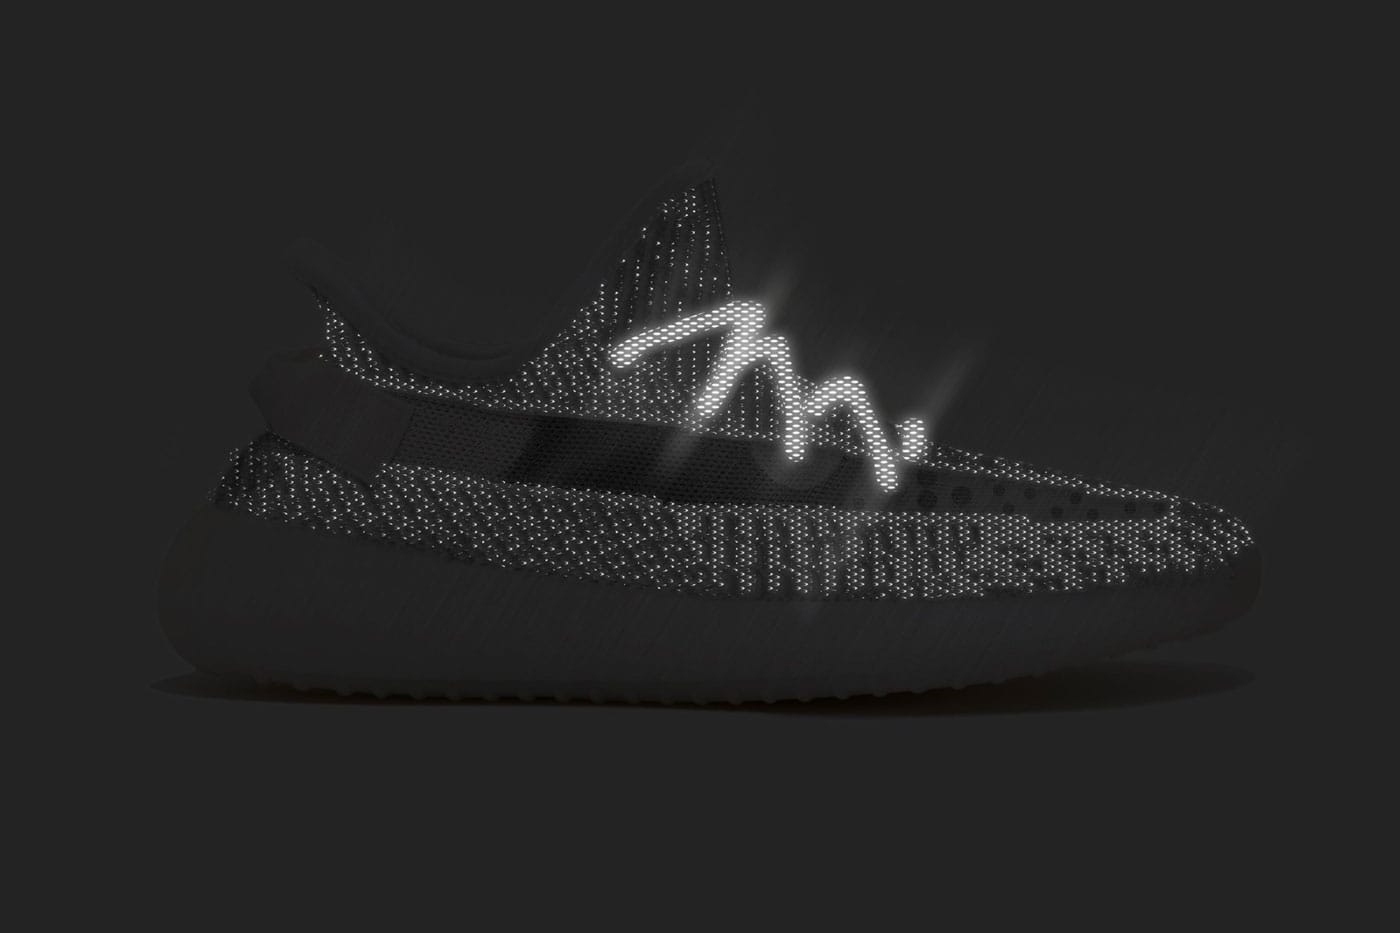 adidas yeezy boost 350 v2 black reflective release date